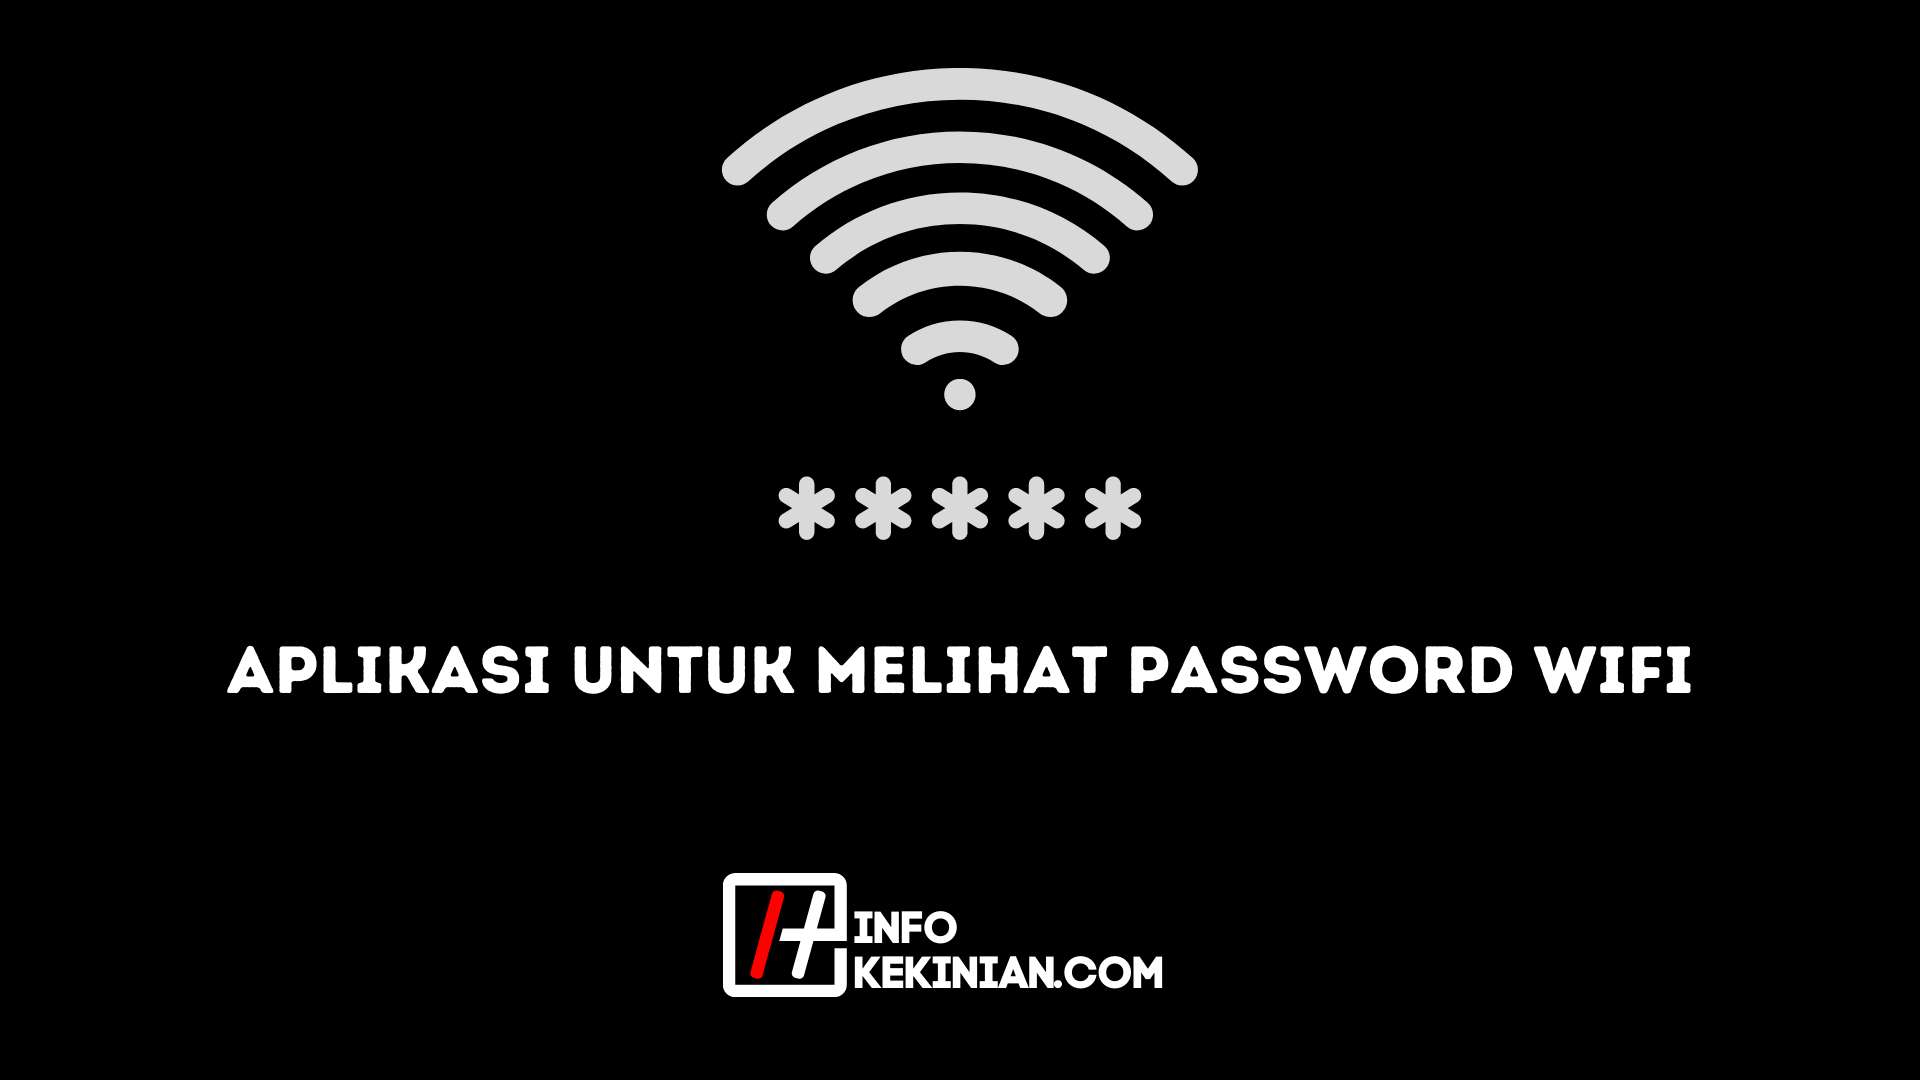 app to see wifi password